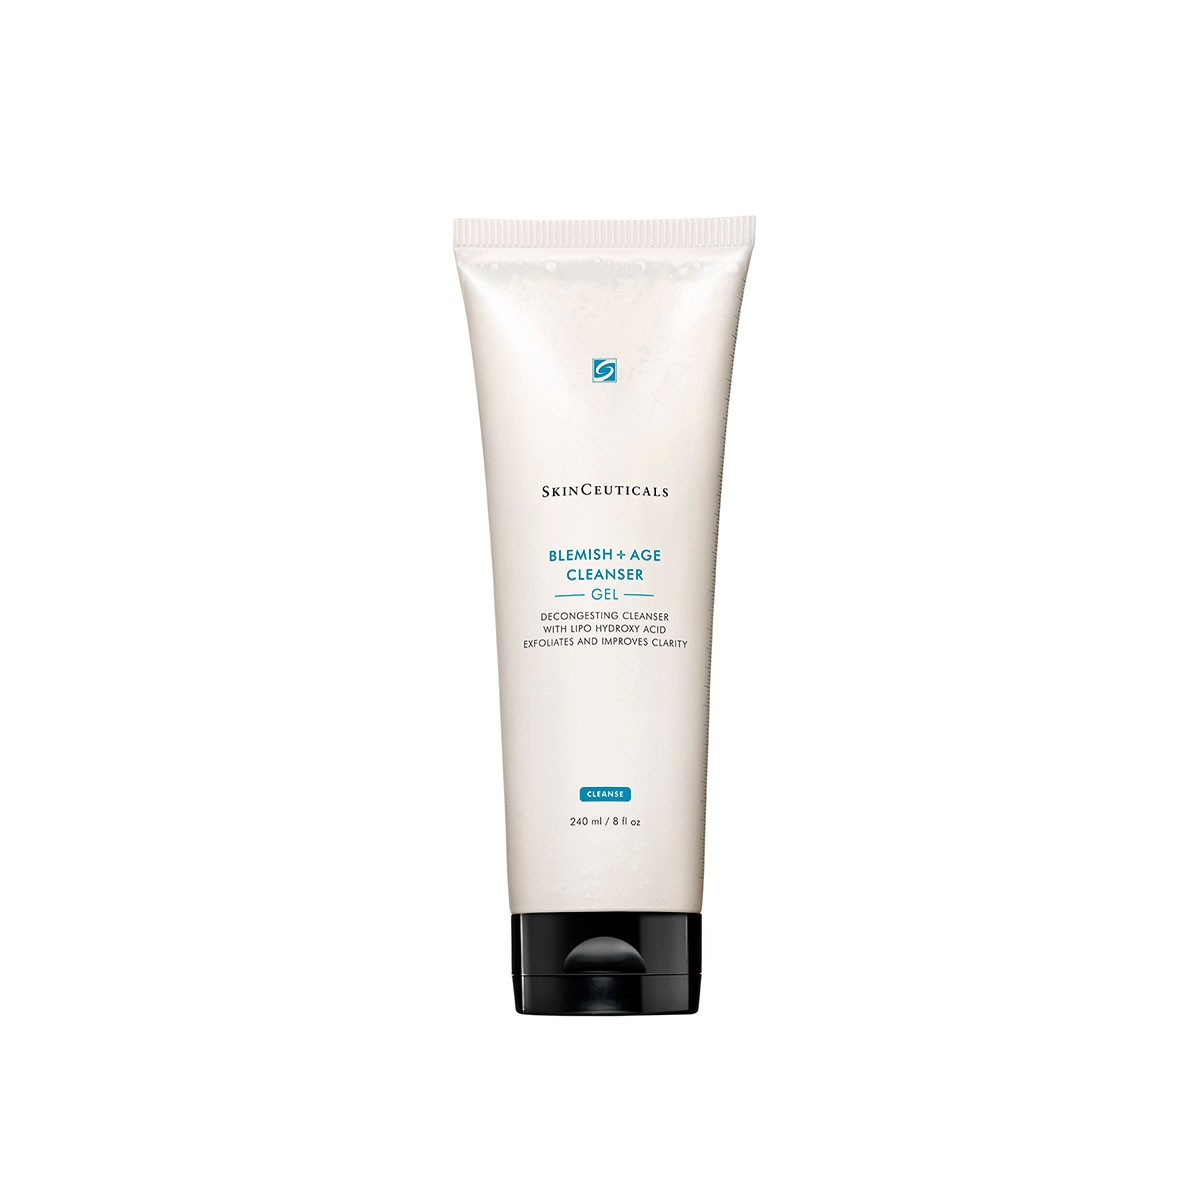 SkinCeuticals Blemish + Age Cleansing Gel, 240ml.